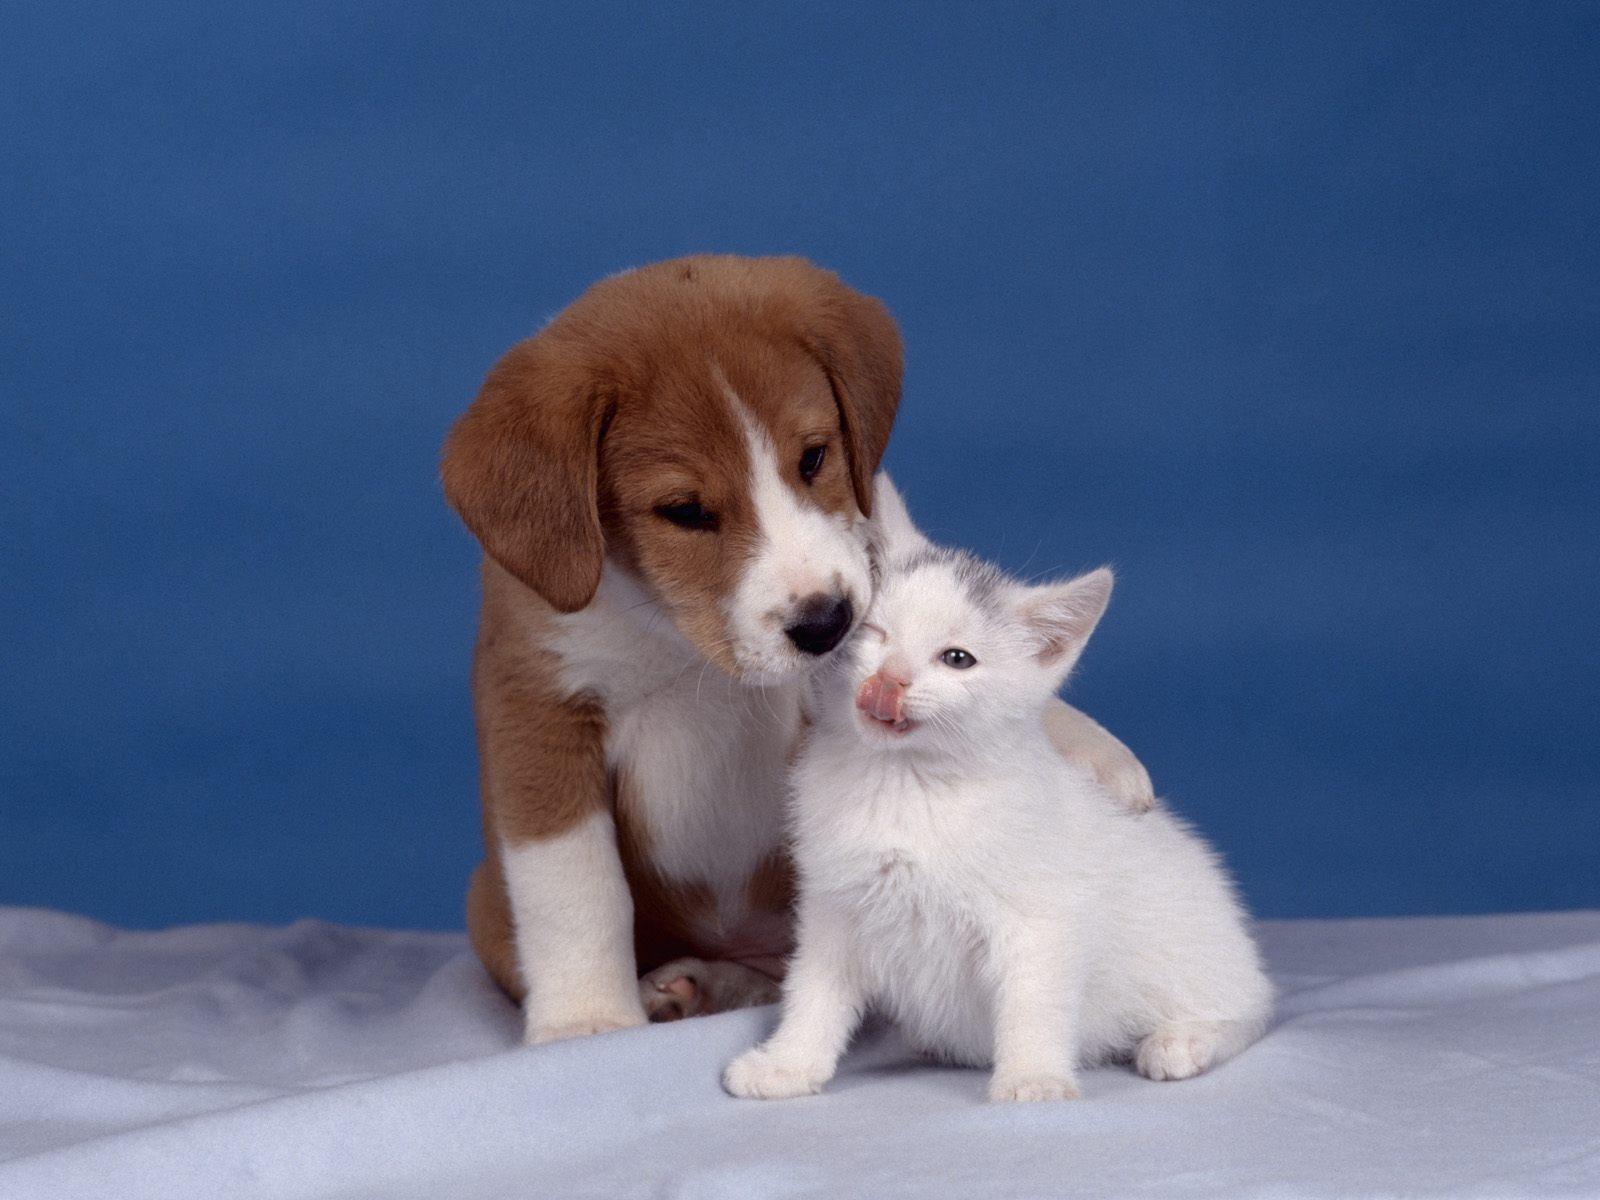 Animals Wallpapers: cute kittens and puppies